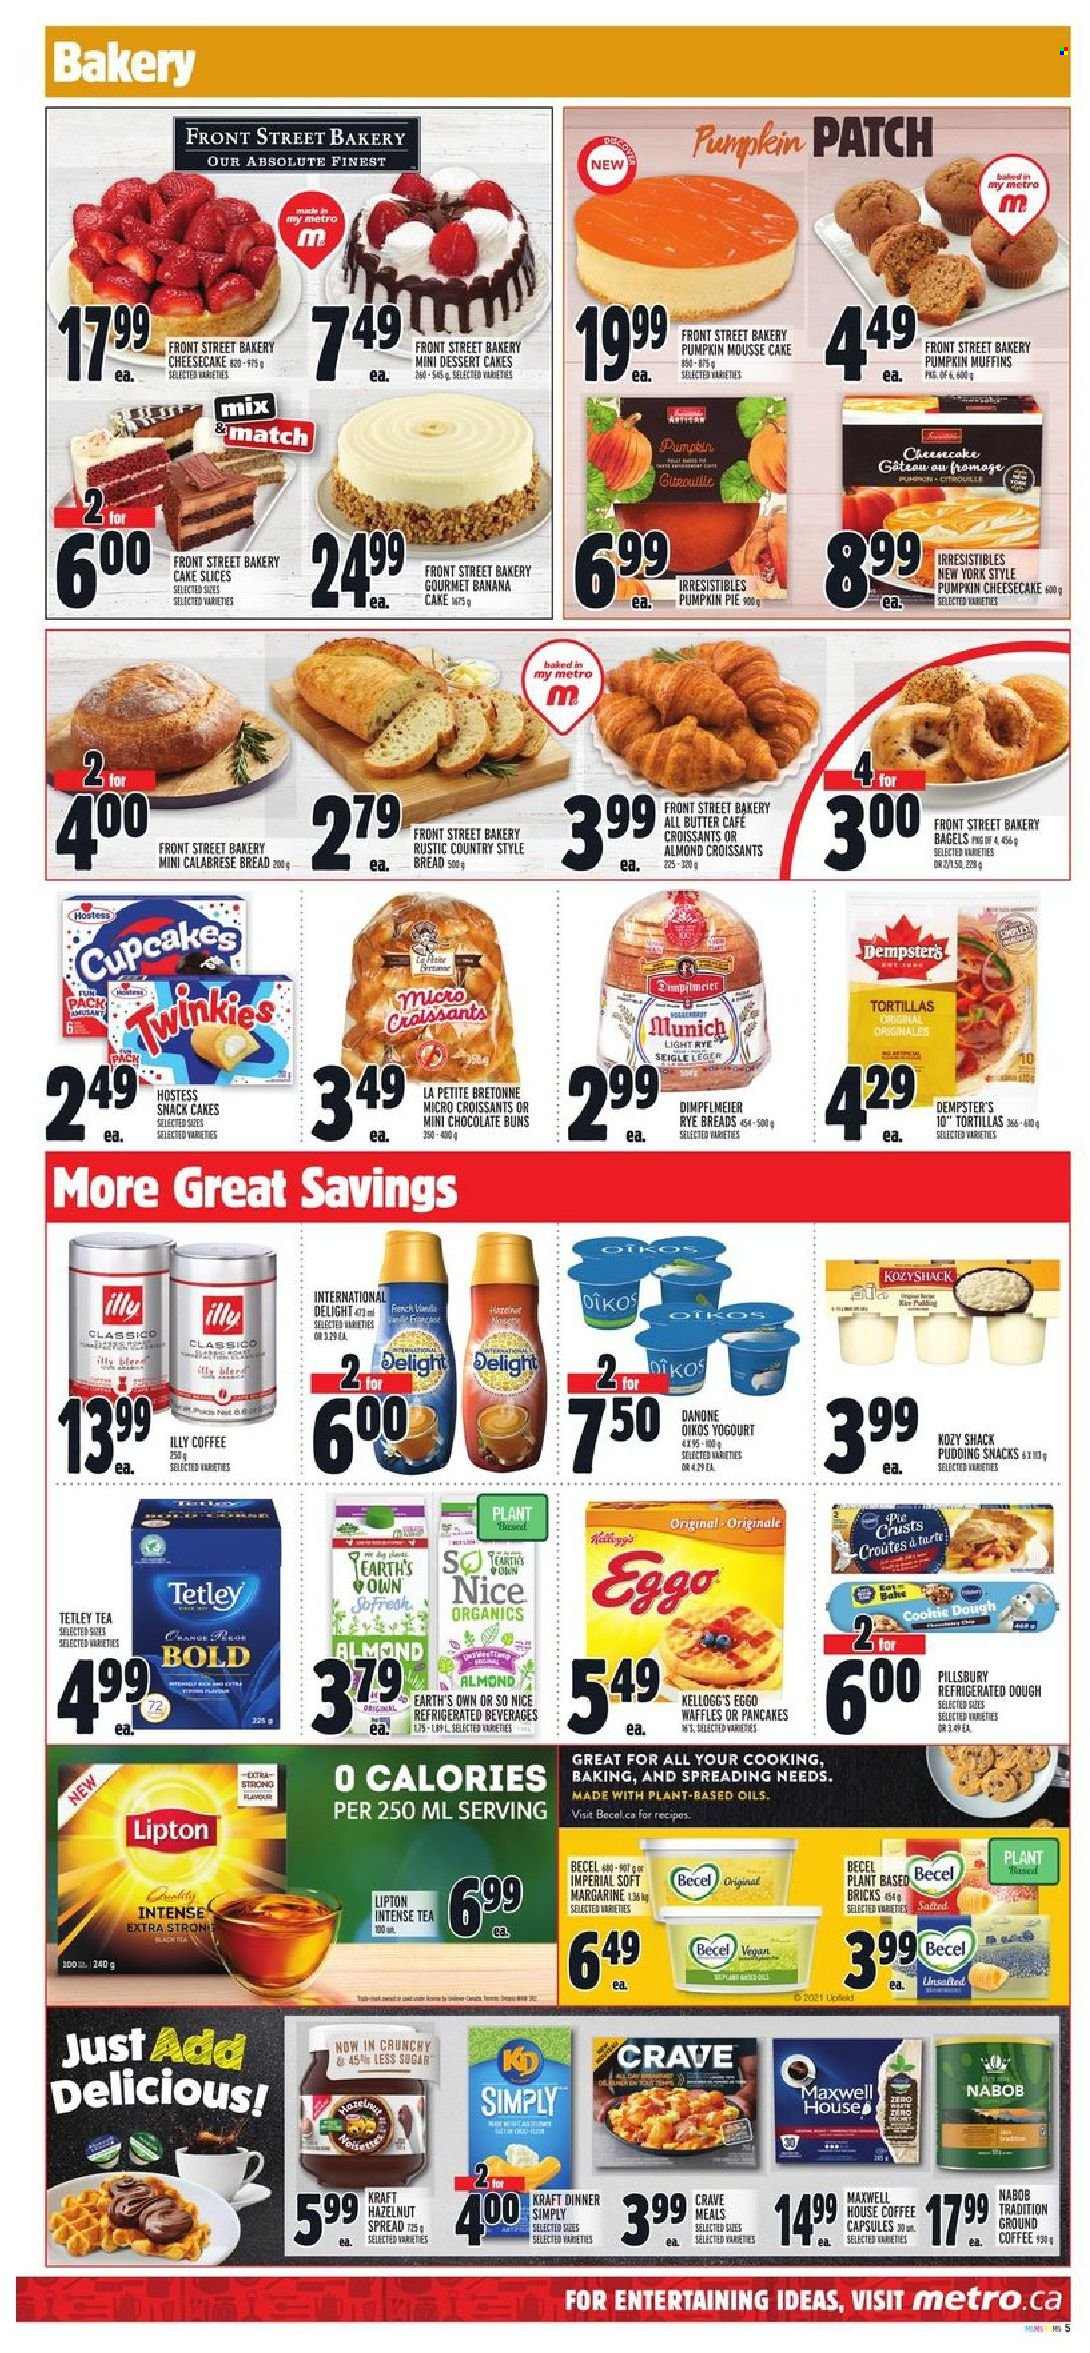 thumbnail - Metro Flyer - September 23, 2021 - September 29, 2021 - Sales products - bagels, bread, tortillas, cake, pie, croissant, buns, cupcake, cheesecake, muffin, waffles, pumpkin, Pillsbury, Kraft®, Oikos, margarine, cookie dough, chocolate, snack, Kellogg's, pie crust, Classico, hazelnut spread, Maxwell House, tea, coffee, ground coffee, coffee capsules, Illy, So Nice, Absolute, Danone, Lipton. Page 6.